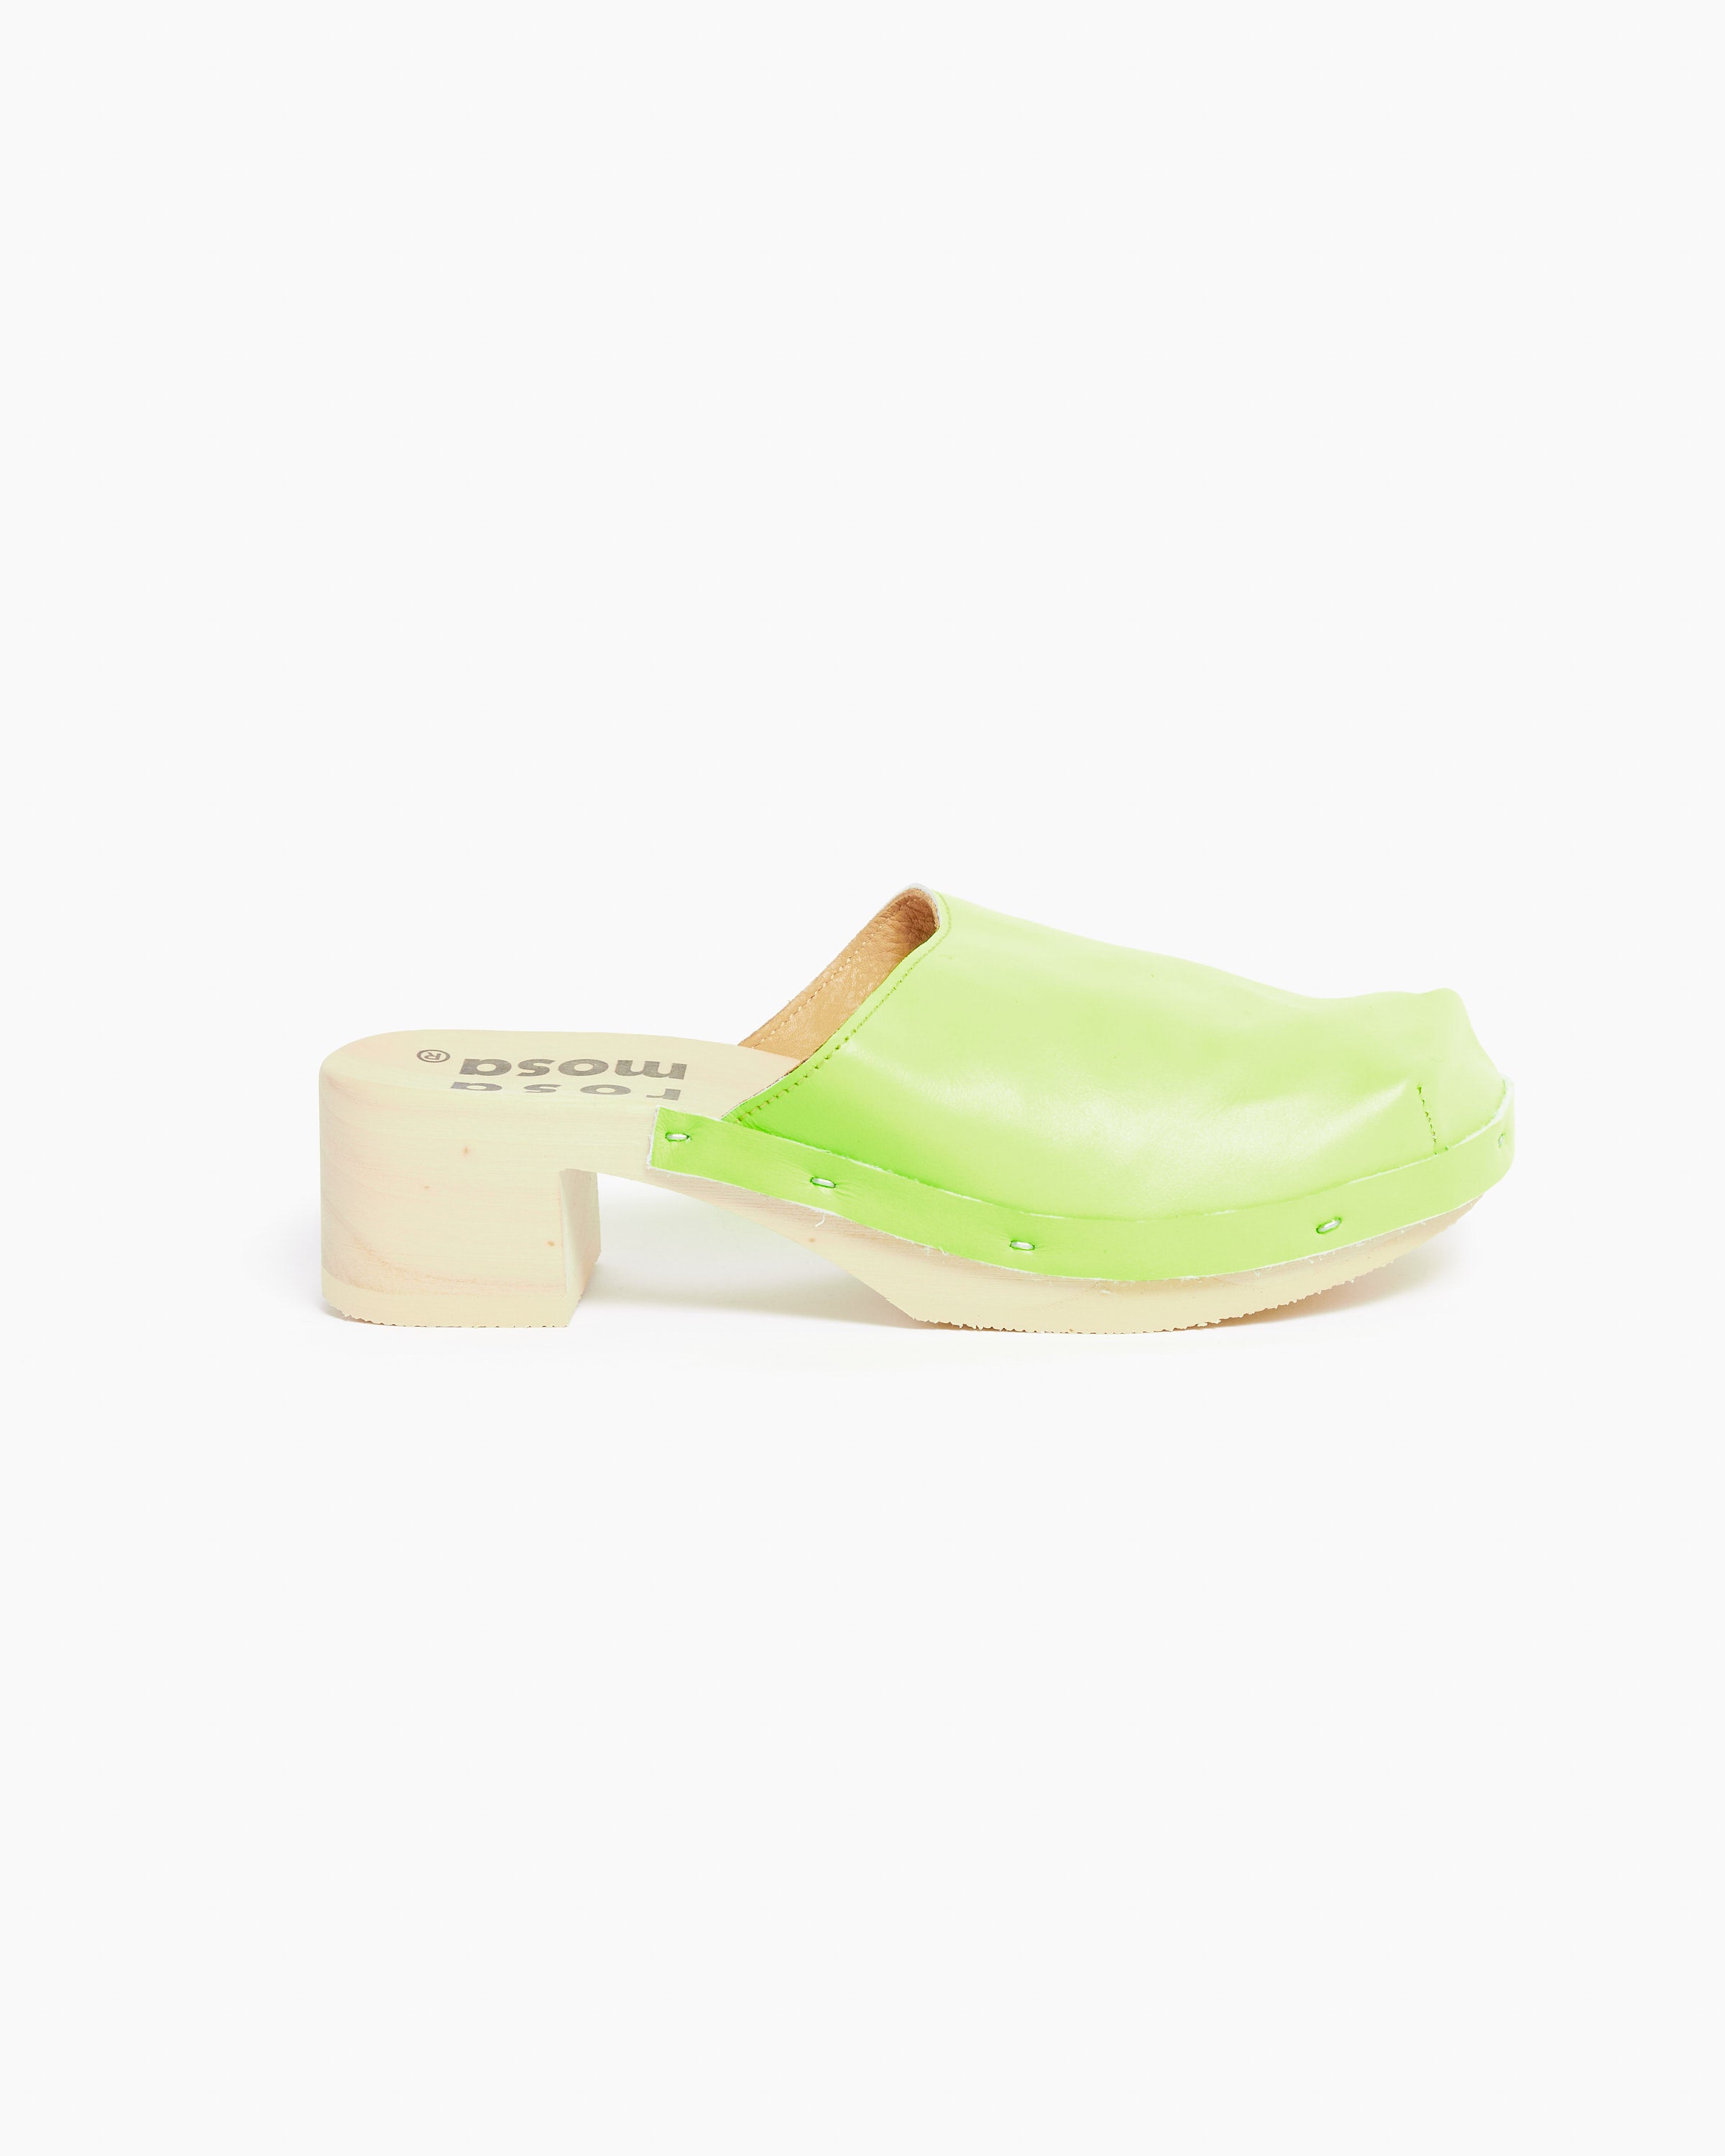 Rocco Geo Sandal in Lime